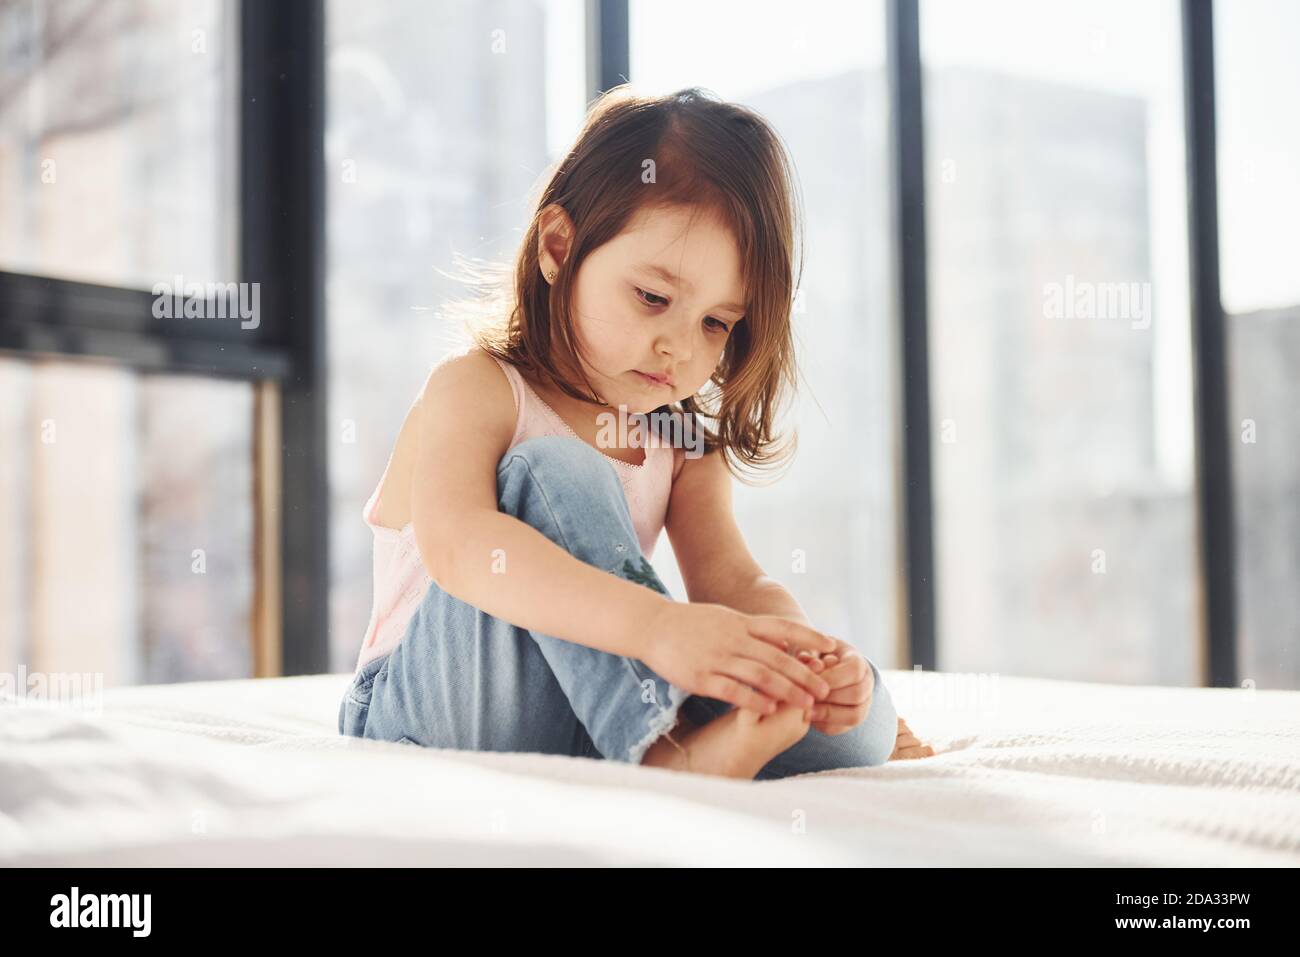 Cute little girl in casual clothes sits on bed alone at daytime Stock Photo